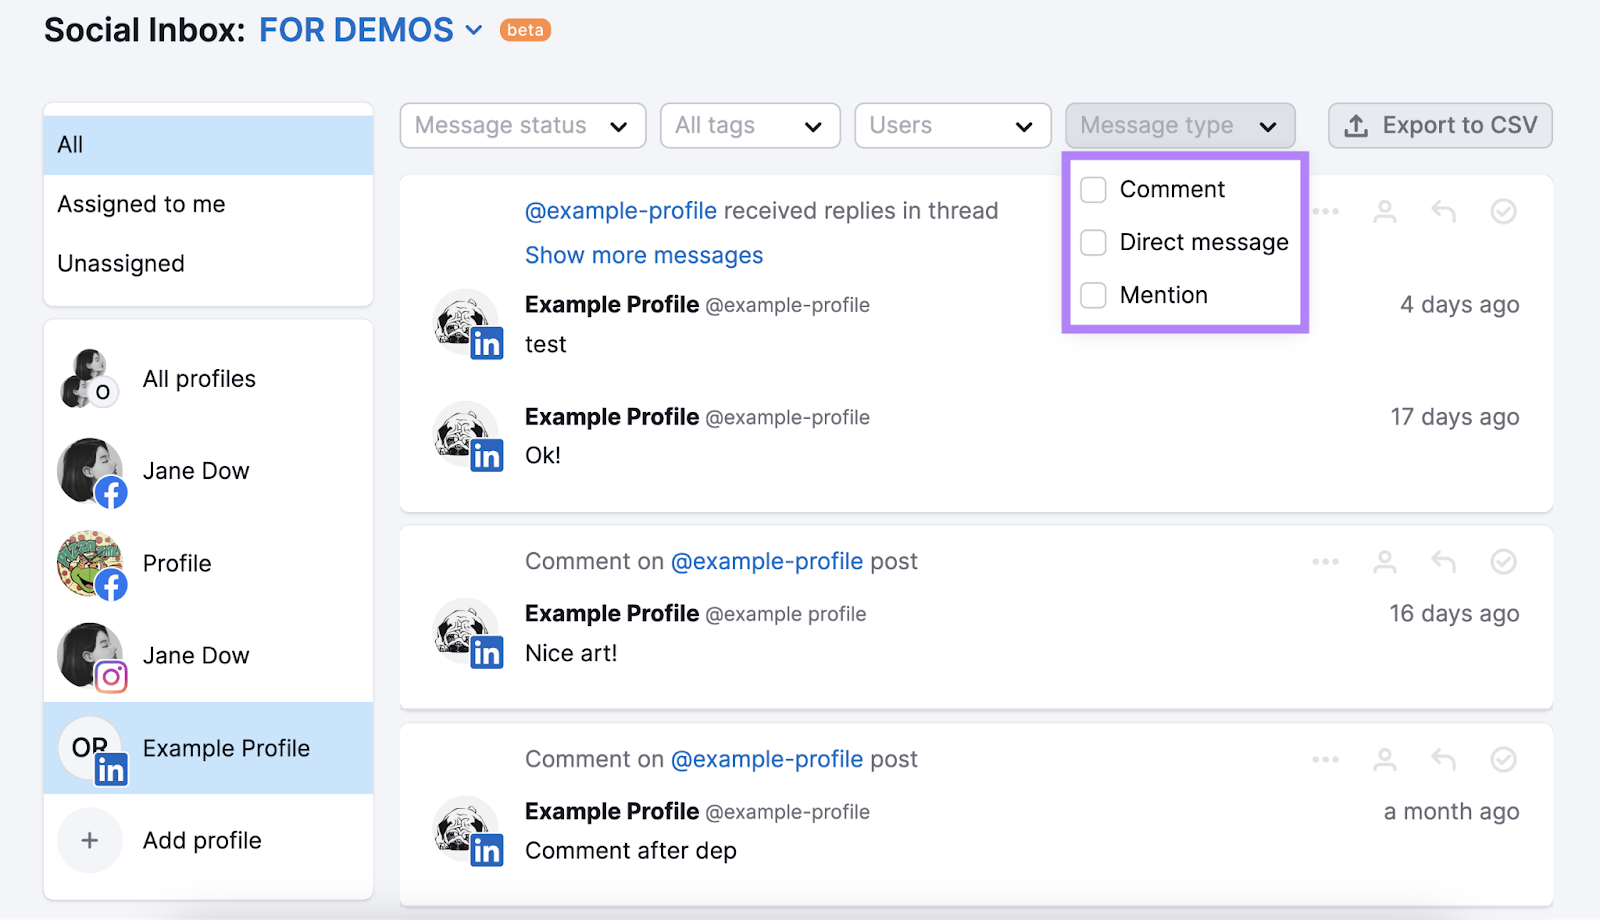 Semrush Social Inbox instrumentality   showing LinkedIn interface with comments, DMs and mentions displayed